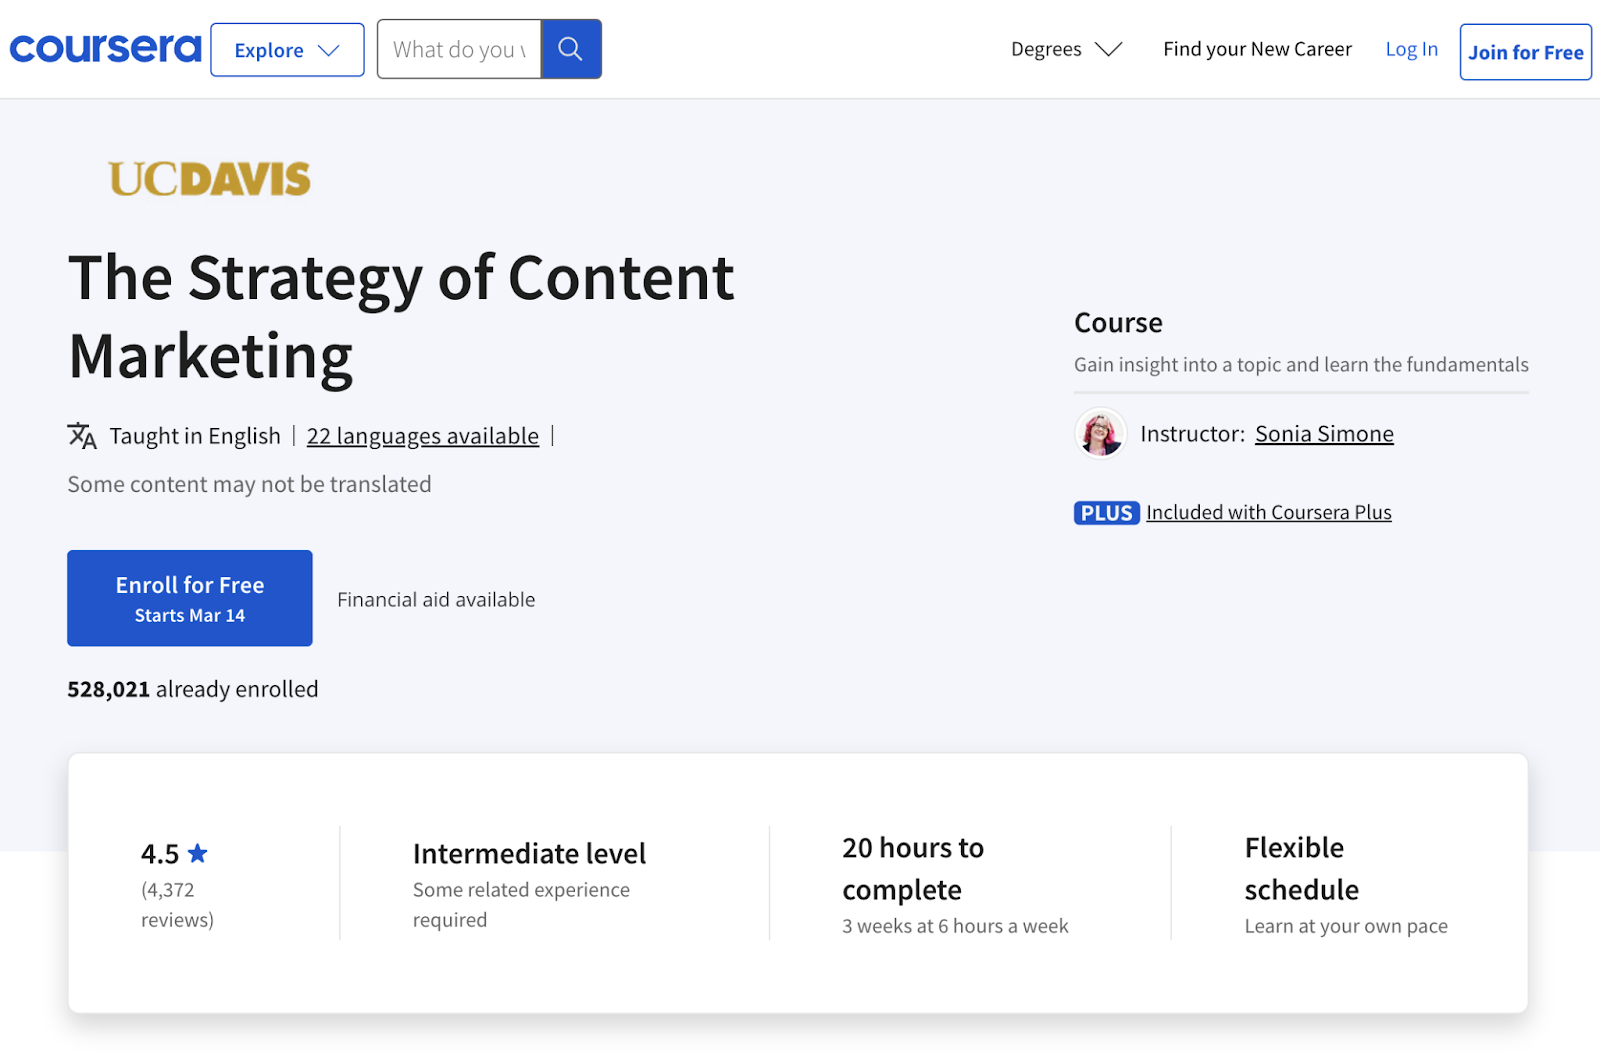 The Strategy of Content Marketing course page